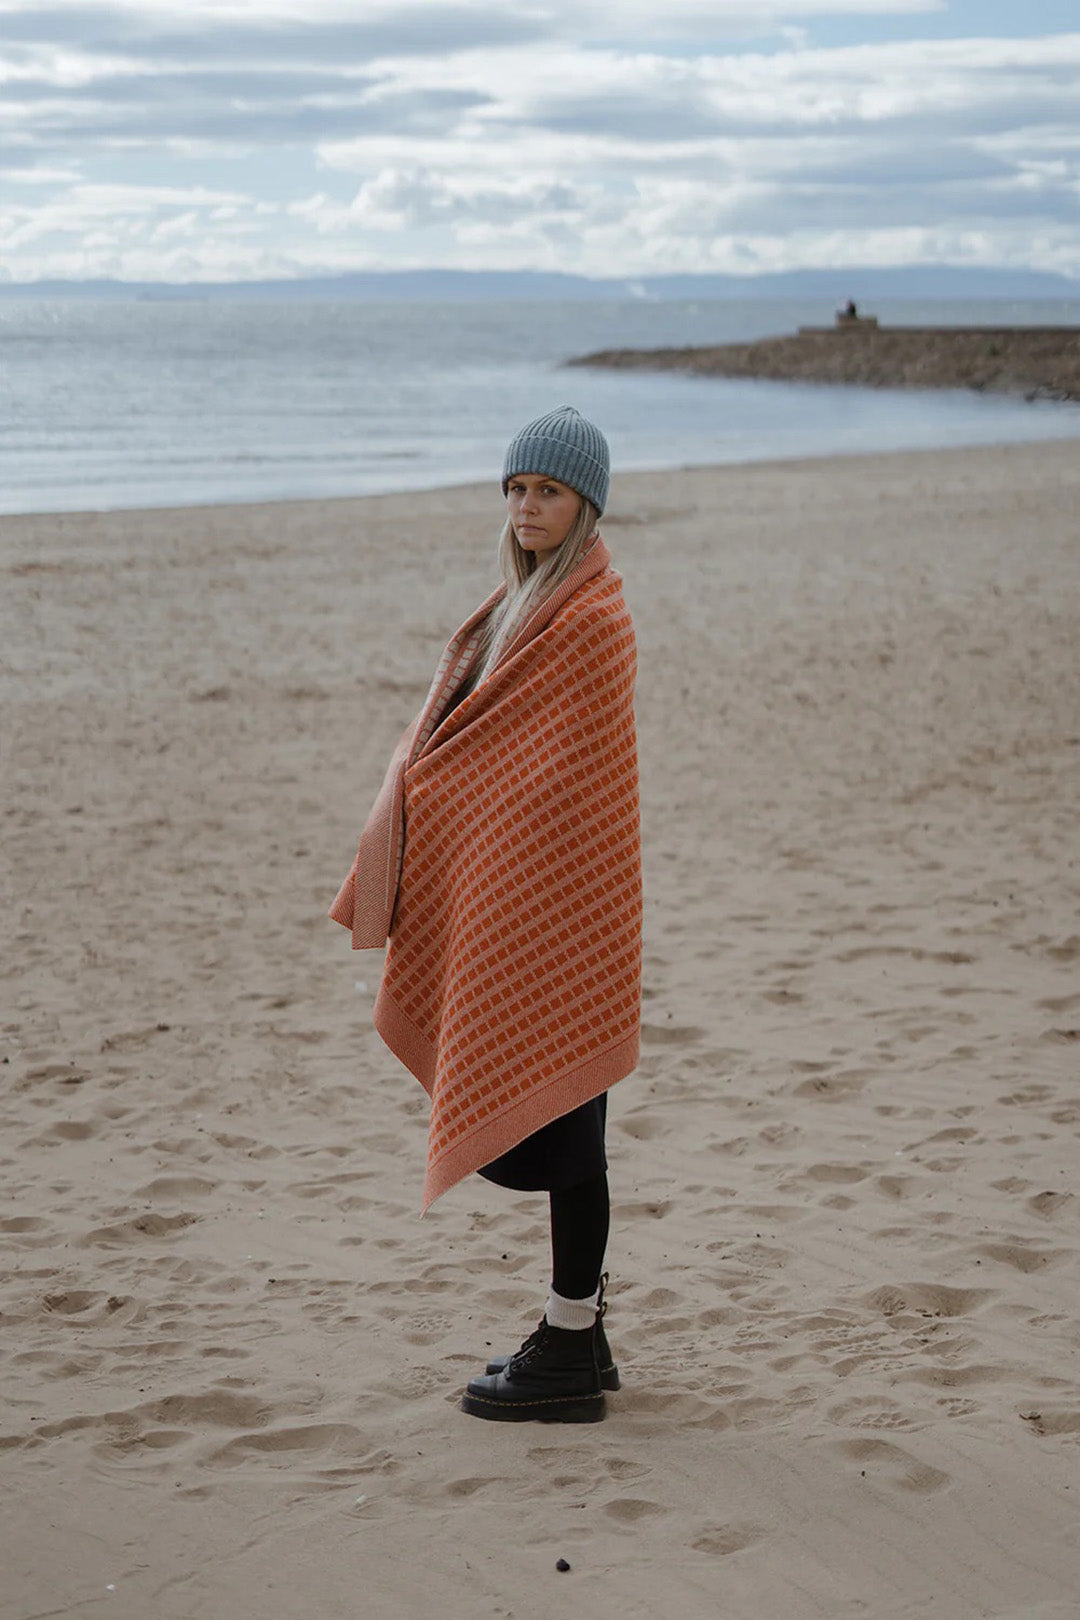 Jacquard knit blanket in furnace Inspired by timeless weave structures and knitted in Ayrshire in sumptuously soft lambswool by Hilary Jane Keyes.